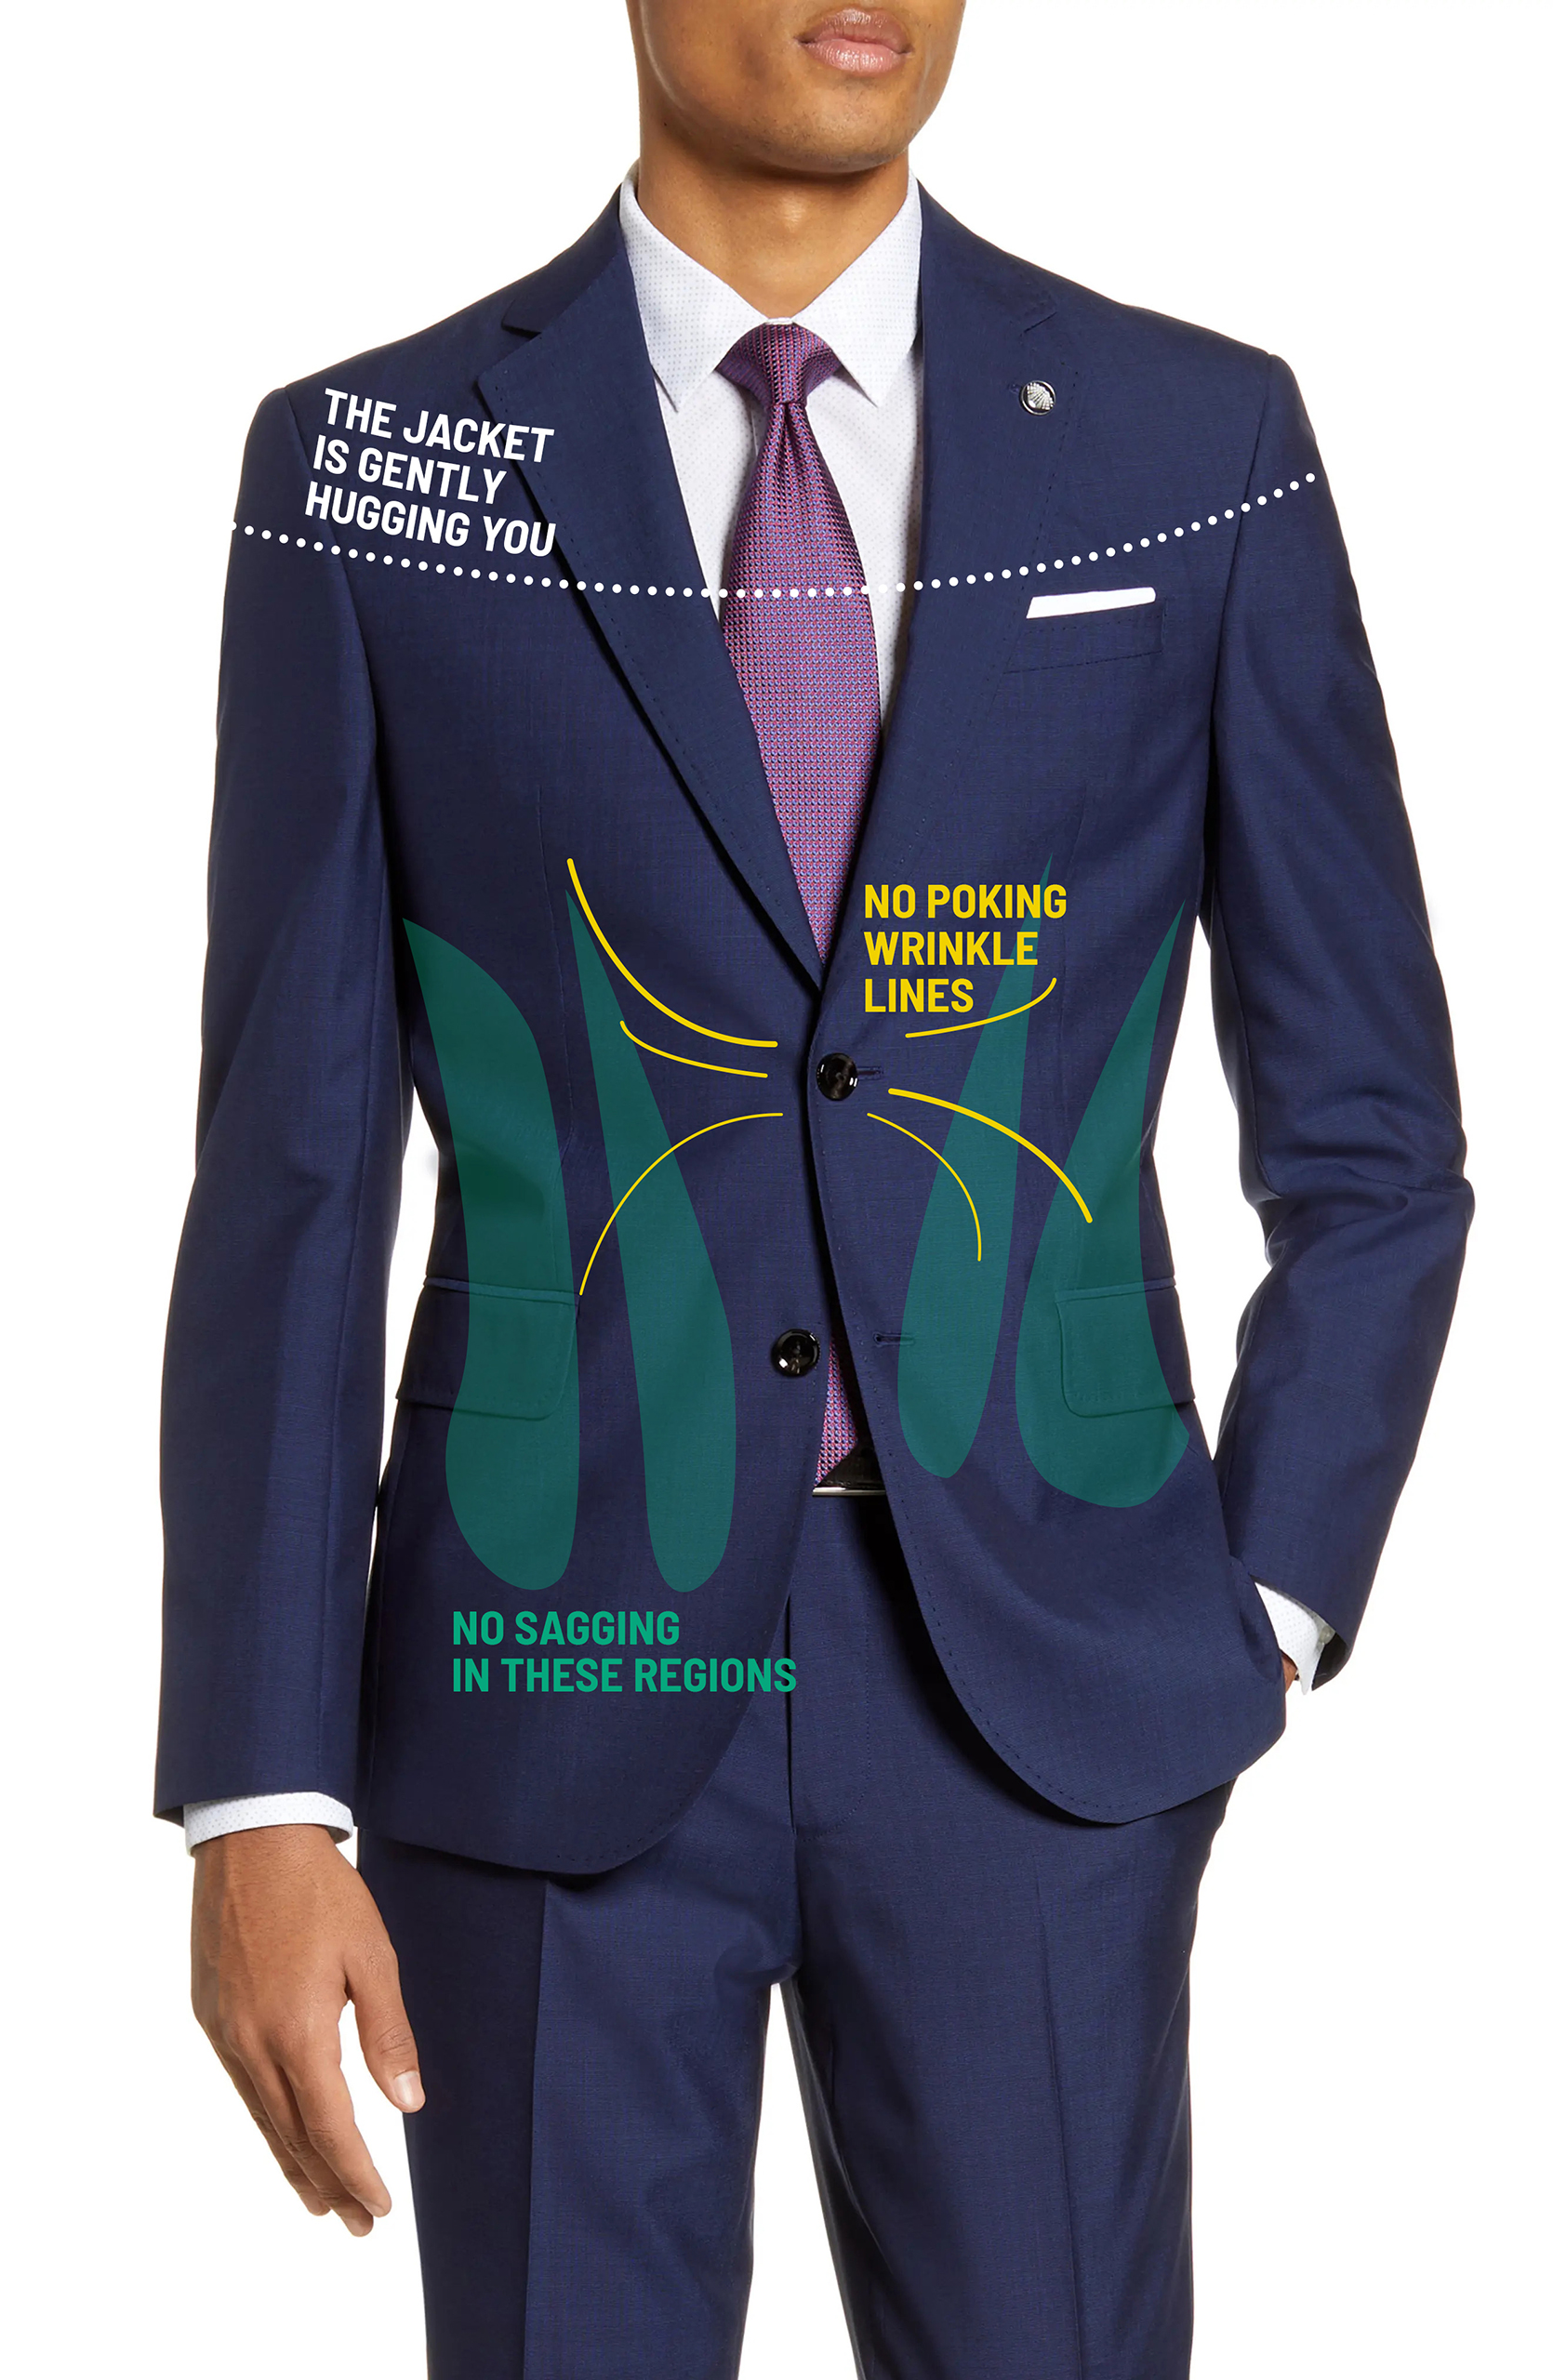 How should a suit jacket fit: flawless button closure